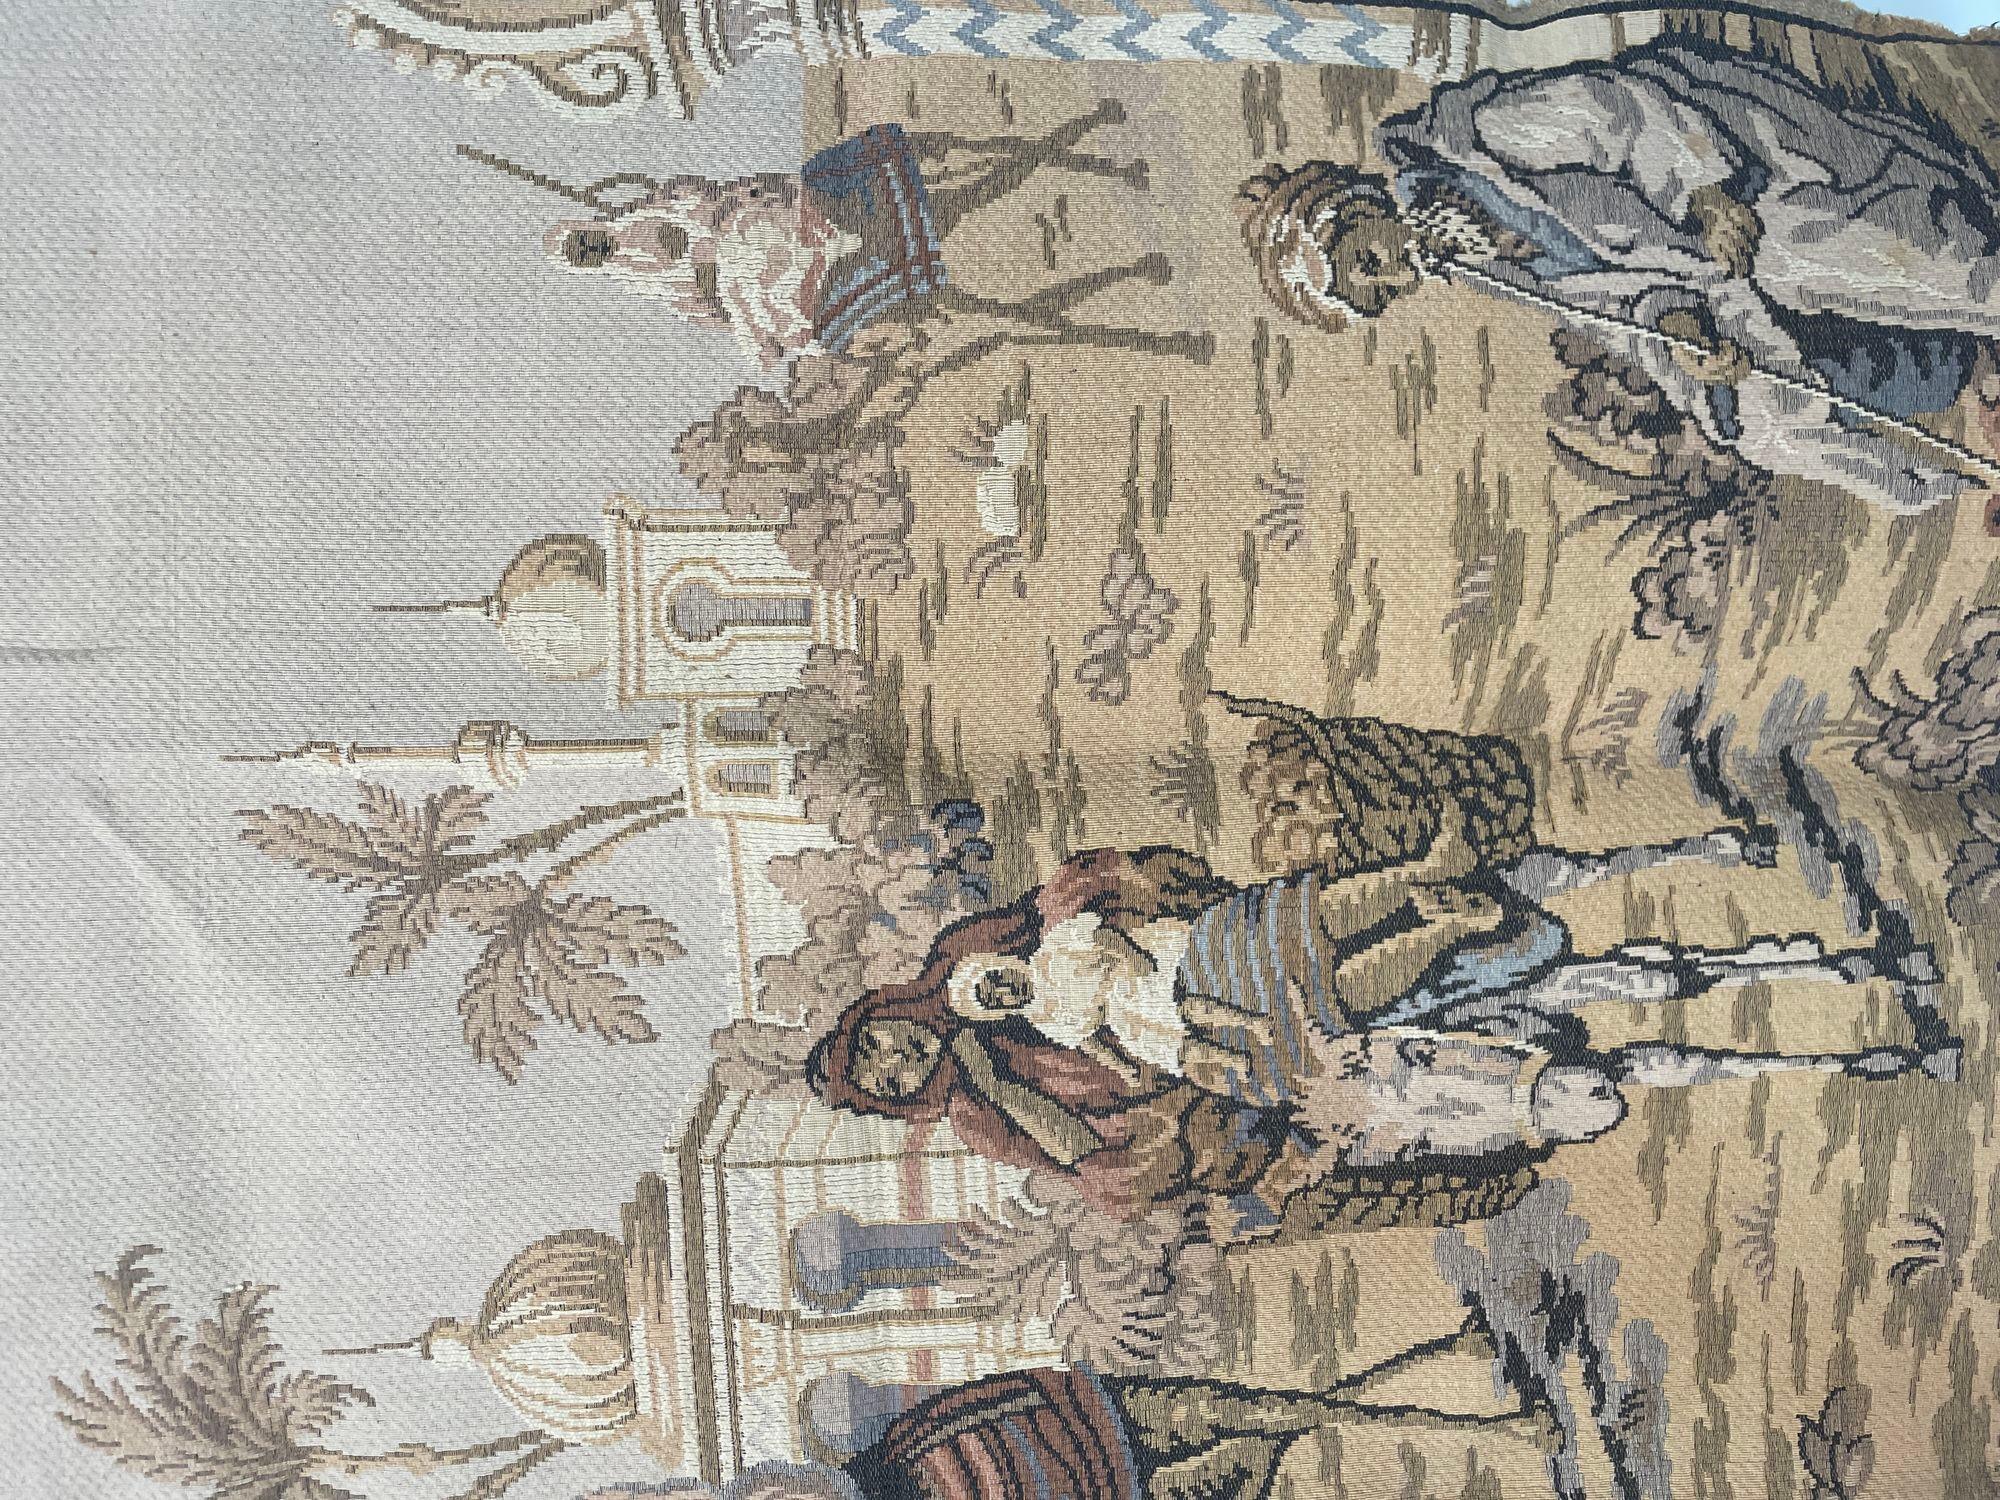 Large Aubusson style european made tapestry with an orientalist 19th century scene depicting Arabs figures and Middle Eastern Moorish architecture in the background.
Probably a scene in North Africa, Morocco or Algeria, Tunisia, Egypt with a man on